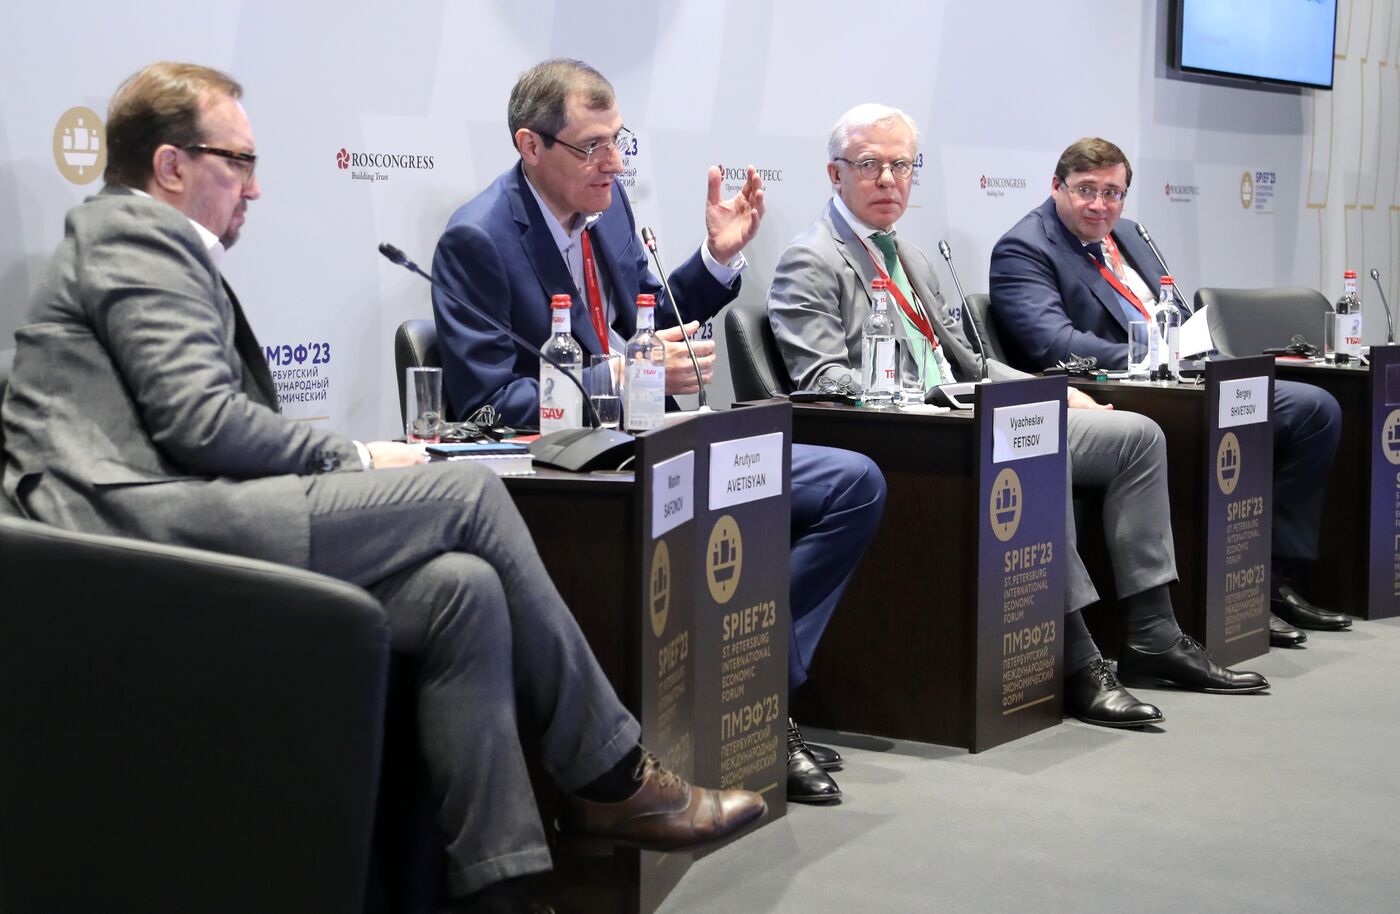 SPIEF-2023. Back to the Future, or Forward to the Past?